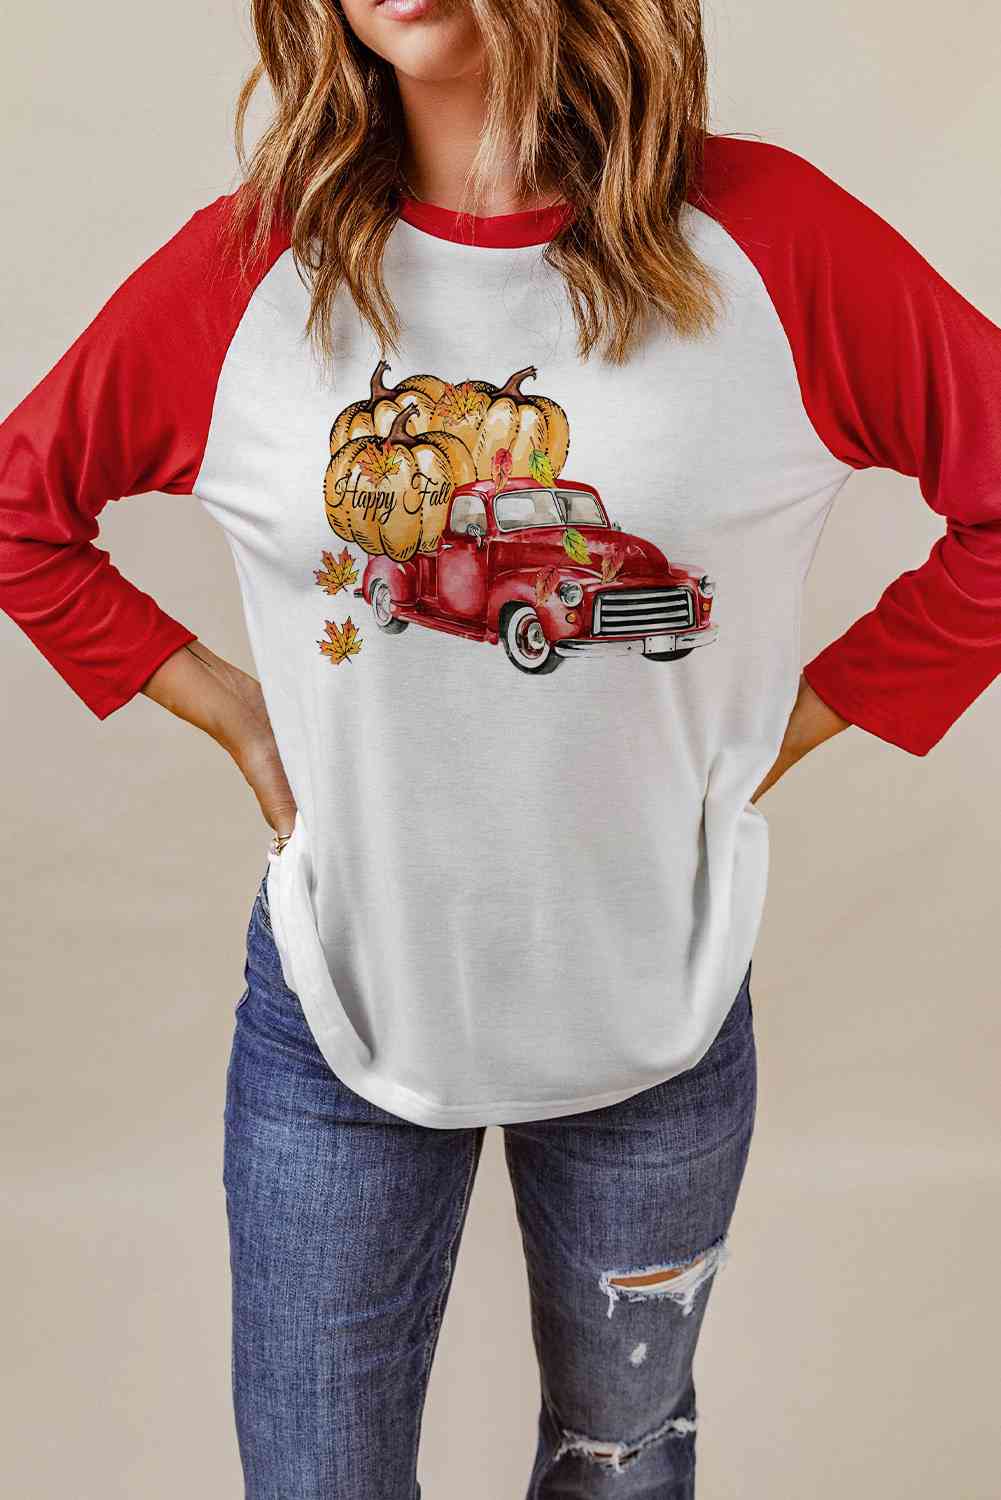 HAPPY FALL Graphic Raglan Sleeve Tee Shirts & Tops Krazy Heart Designs Boutique   